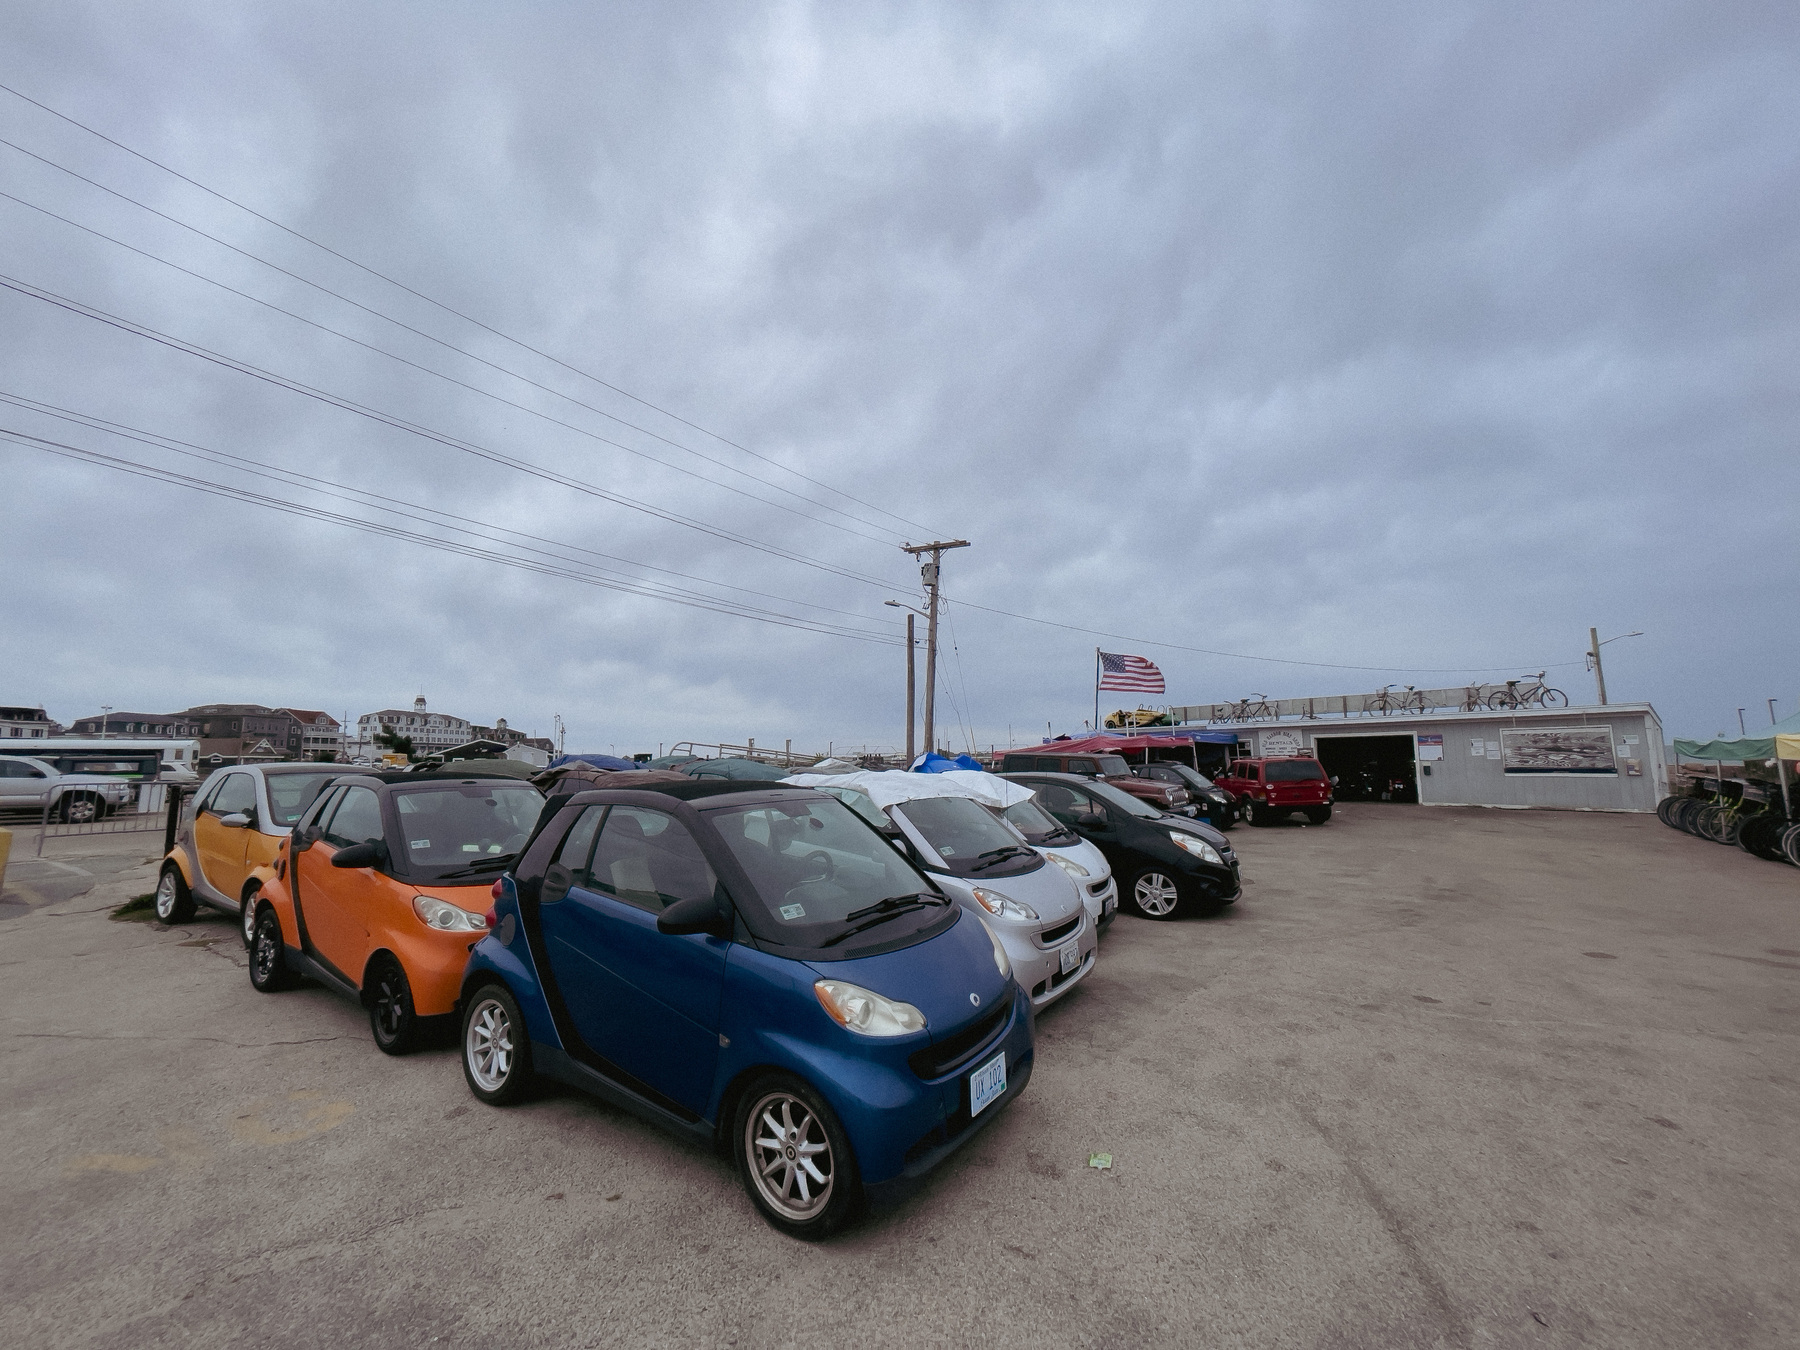 Rental cars waiting to be rented. Cloudy skies above.